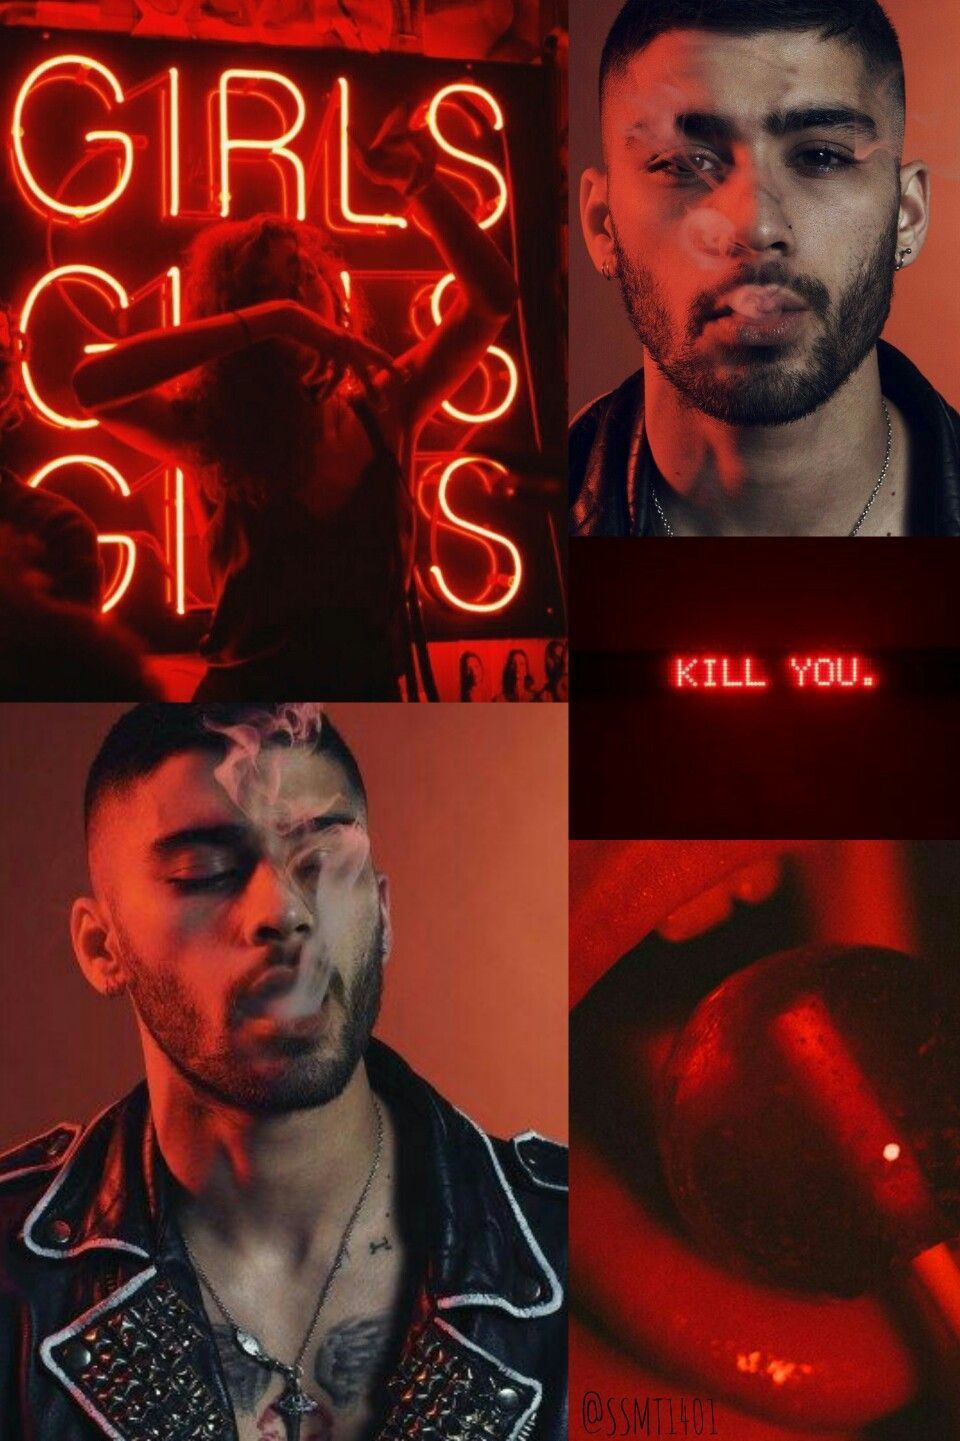 Zayn Malik iPhone Wallpaper, image collections of wallpaper. Zayn, Zayn malik, Papeis de parede para iphone